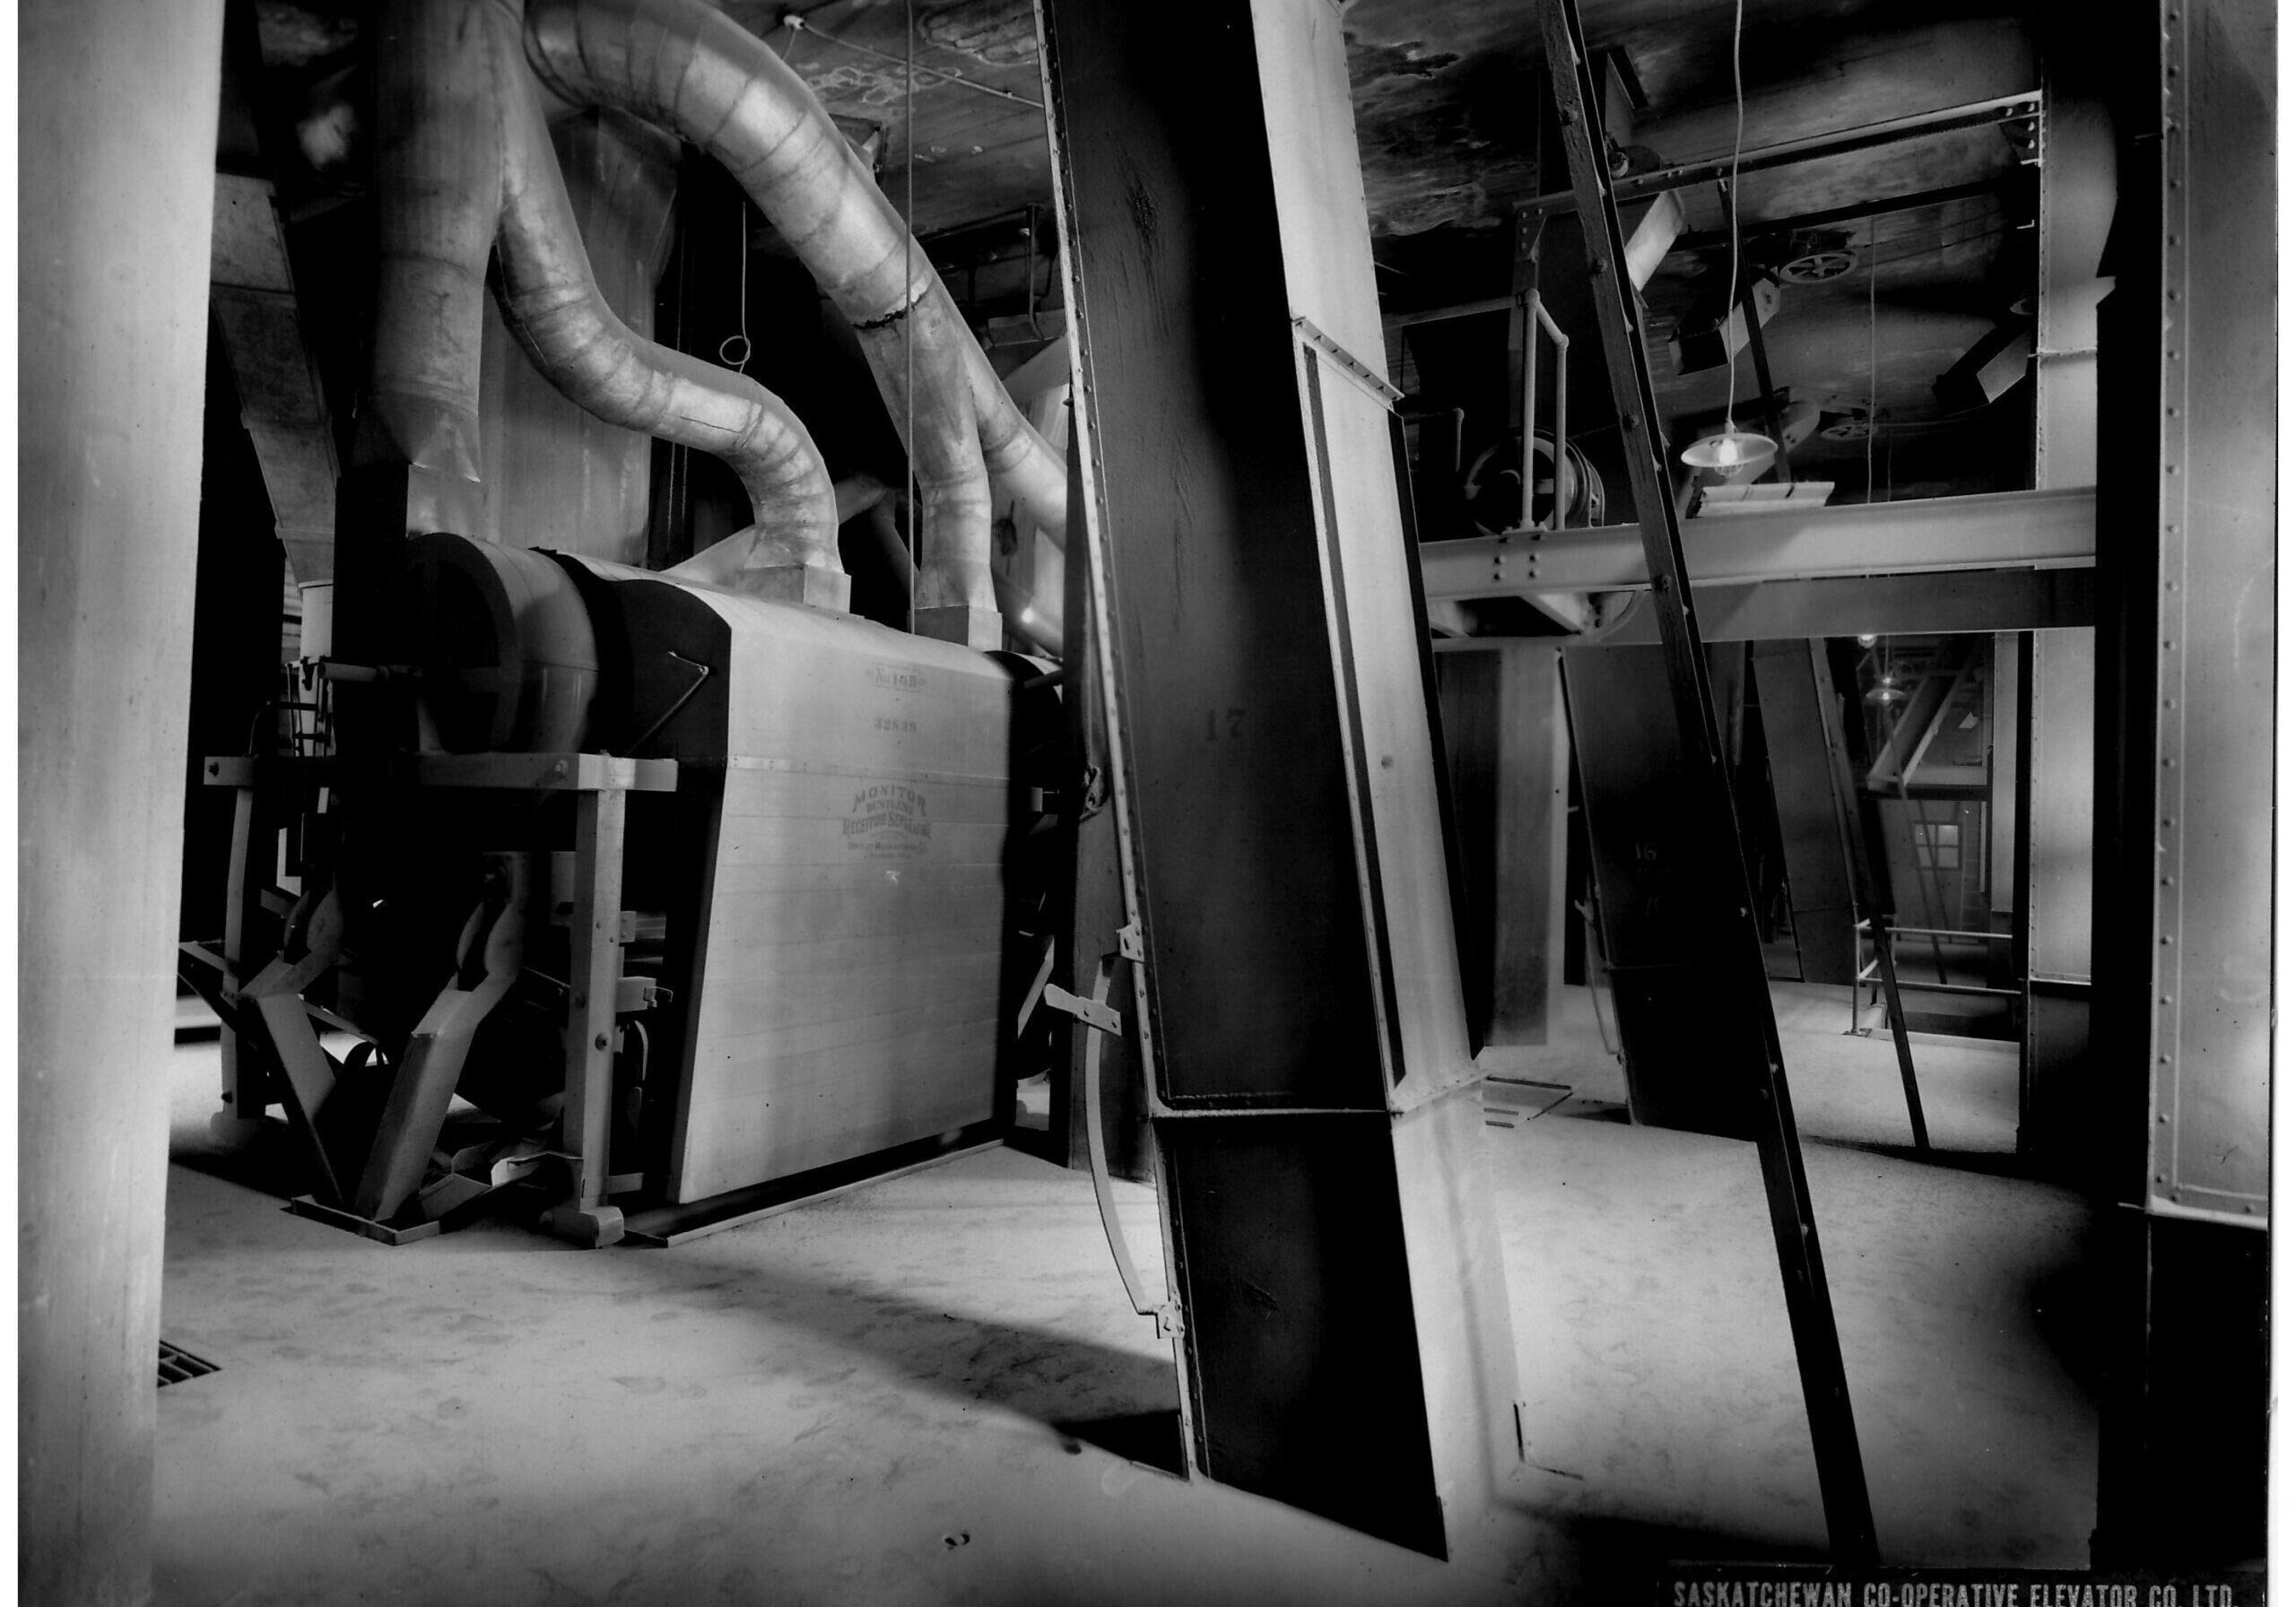 black and white image of the inside of the elevator - first floor with cleaners